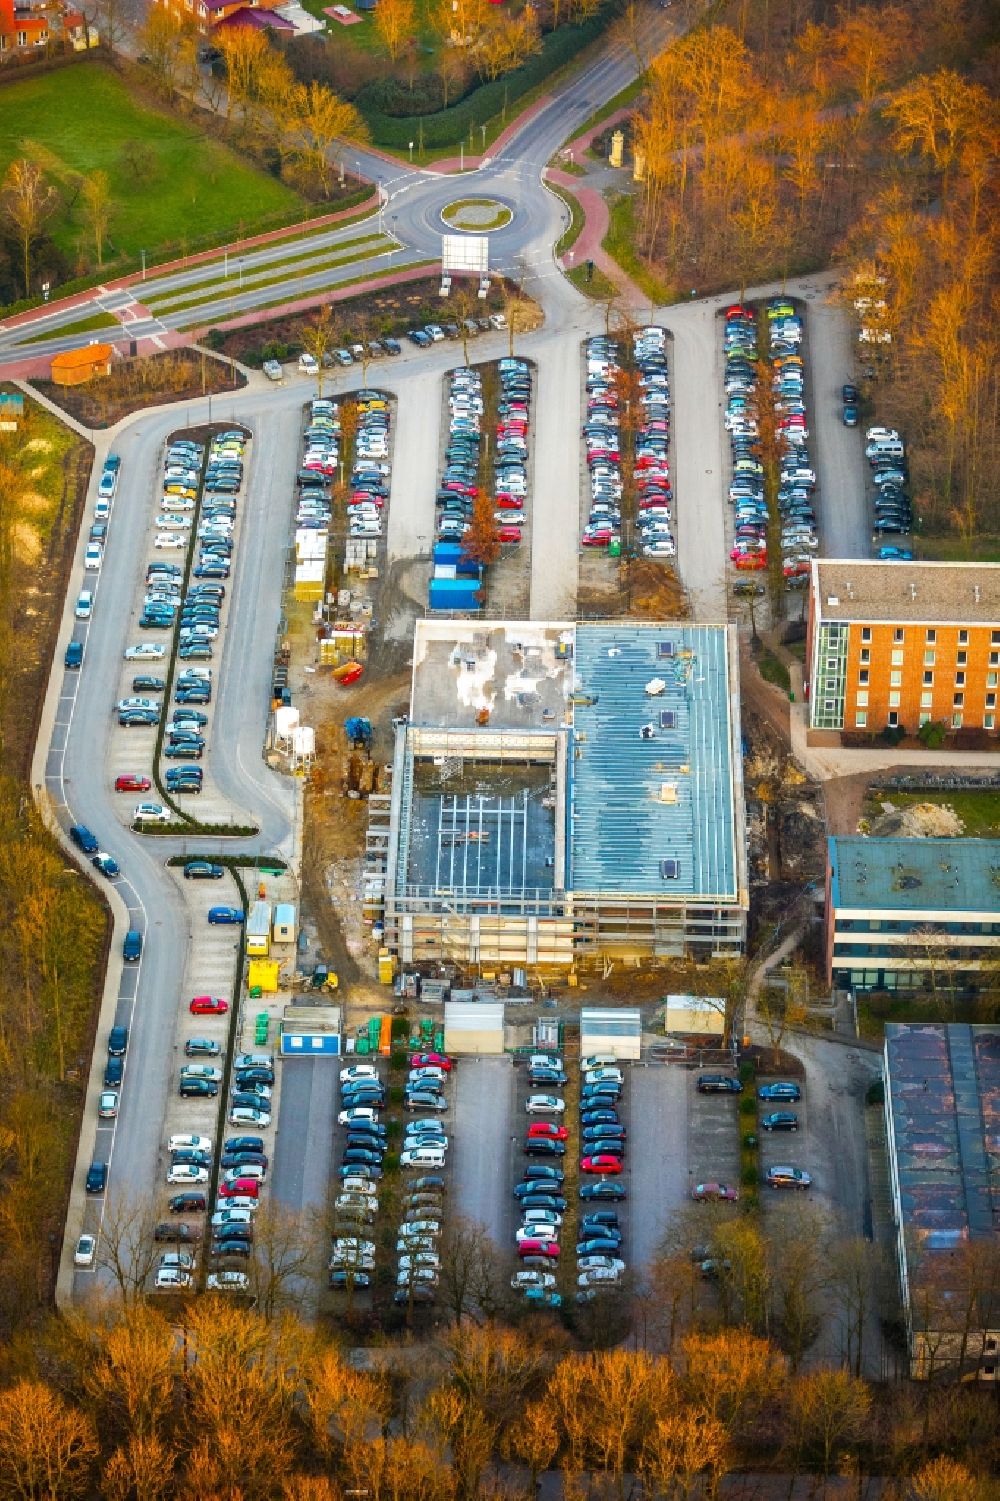 Aerial image Nordkirchen - Mensa - Aula- building on the campus of the University of Fachhochschule fuer Finanzen FHF in Nordkirchen in the state North Rhine-Westphalia, Germany